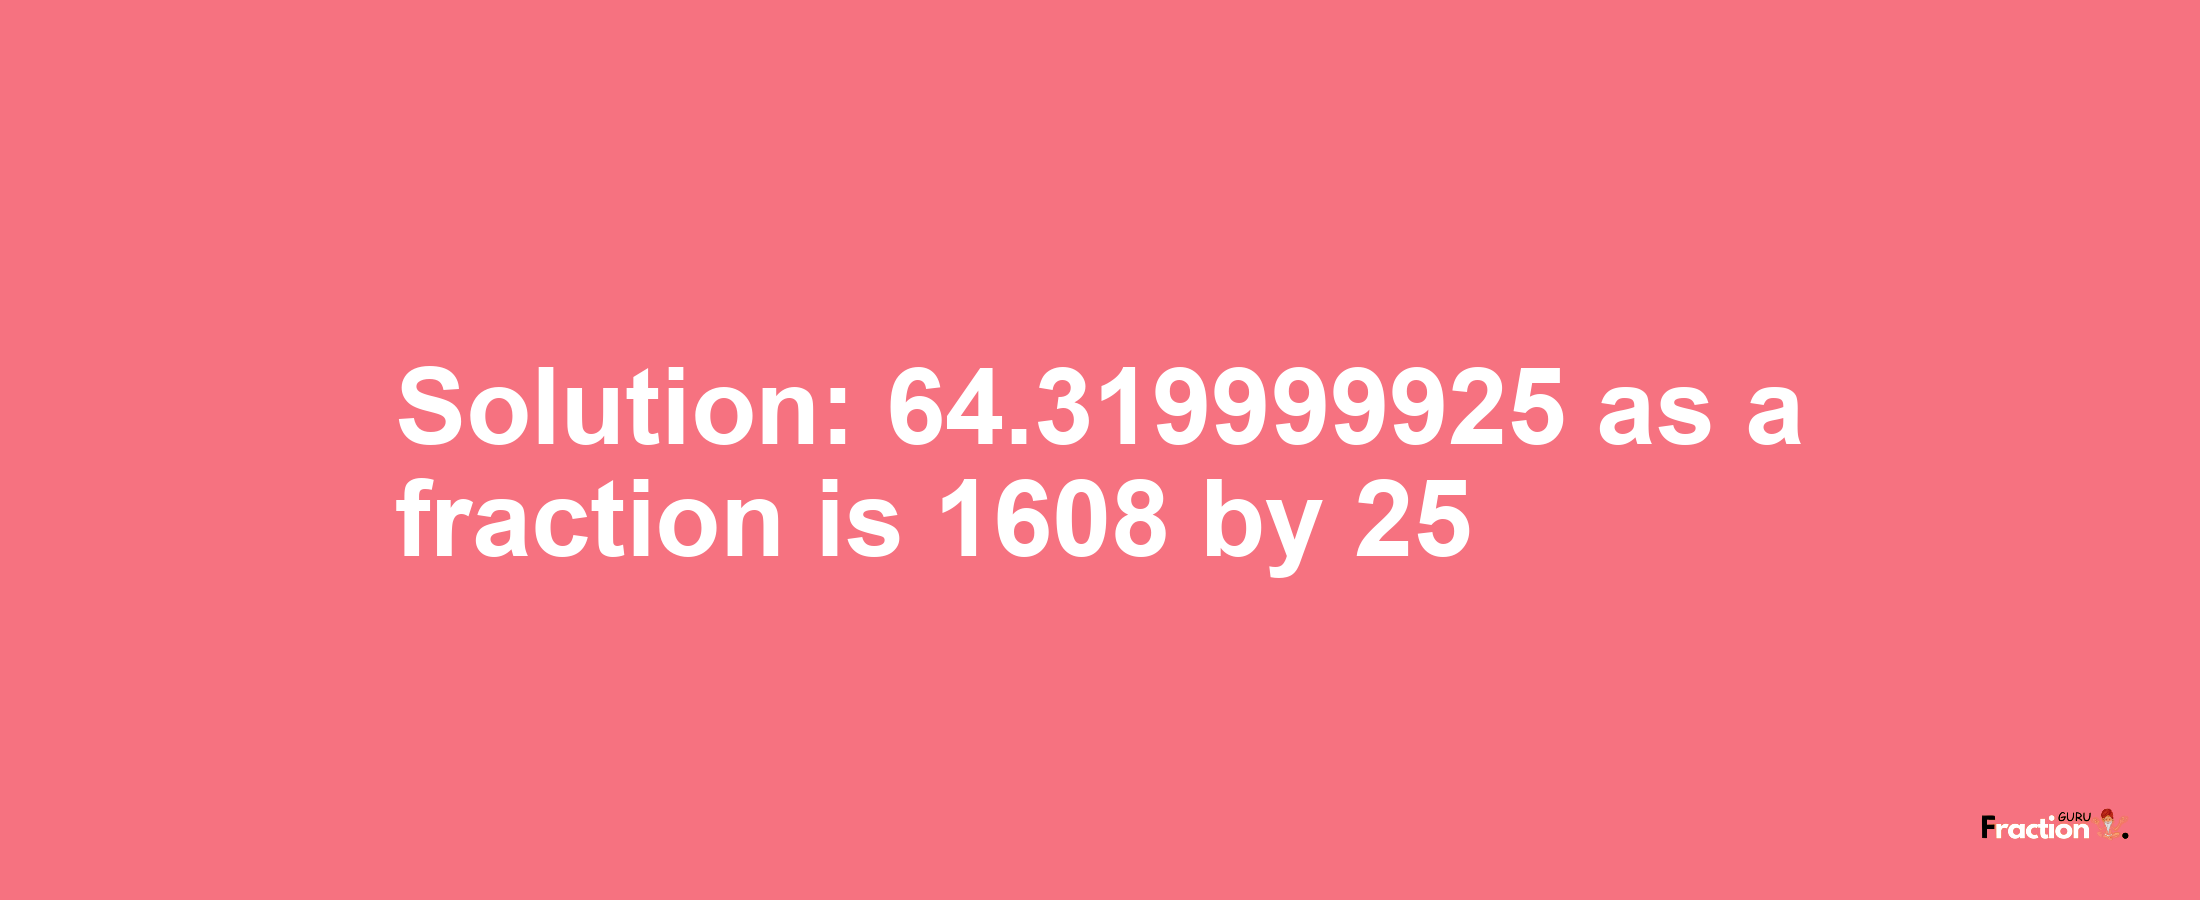 Solution:64.319999925 as a fraction is 1608/25